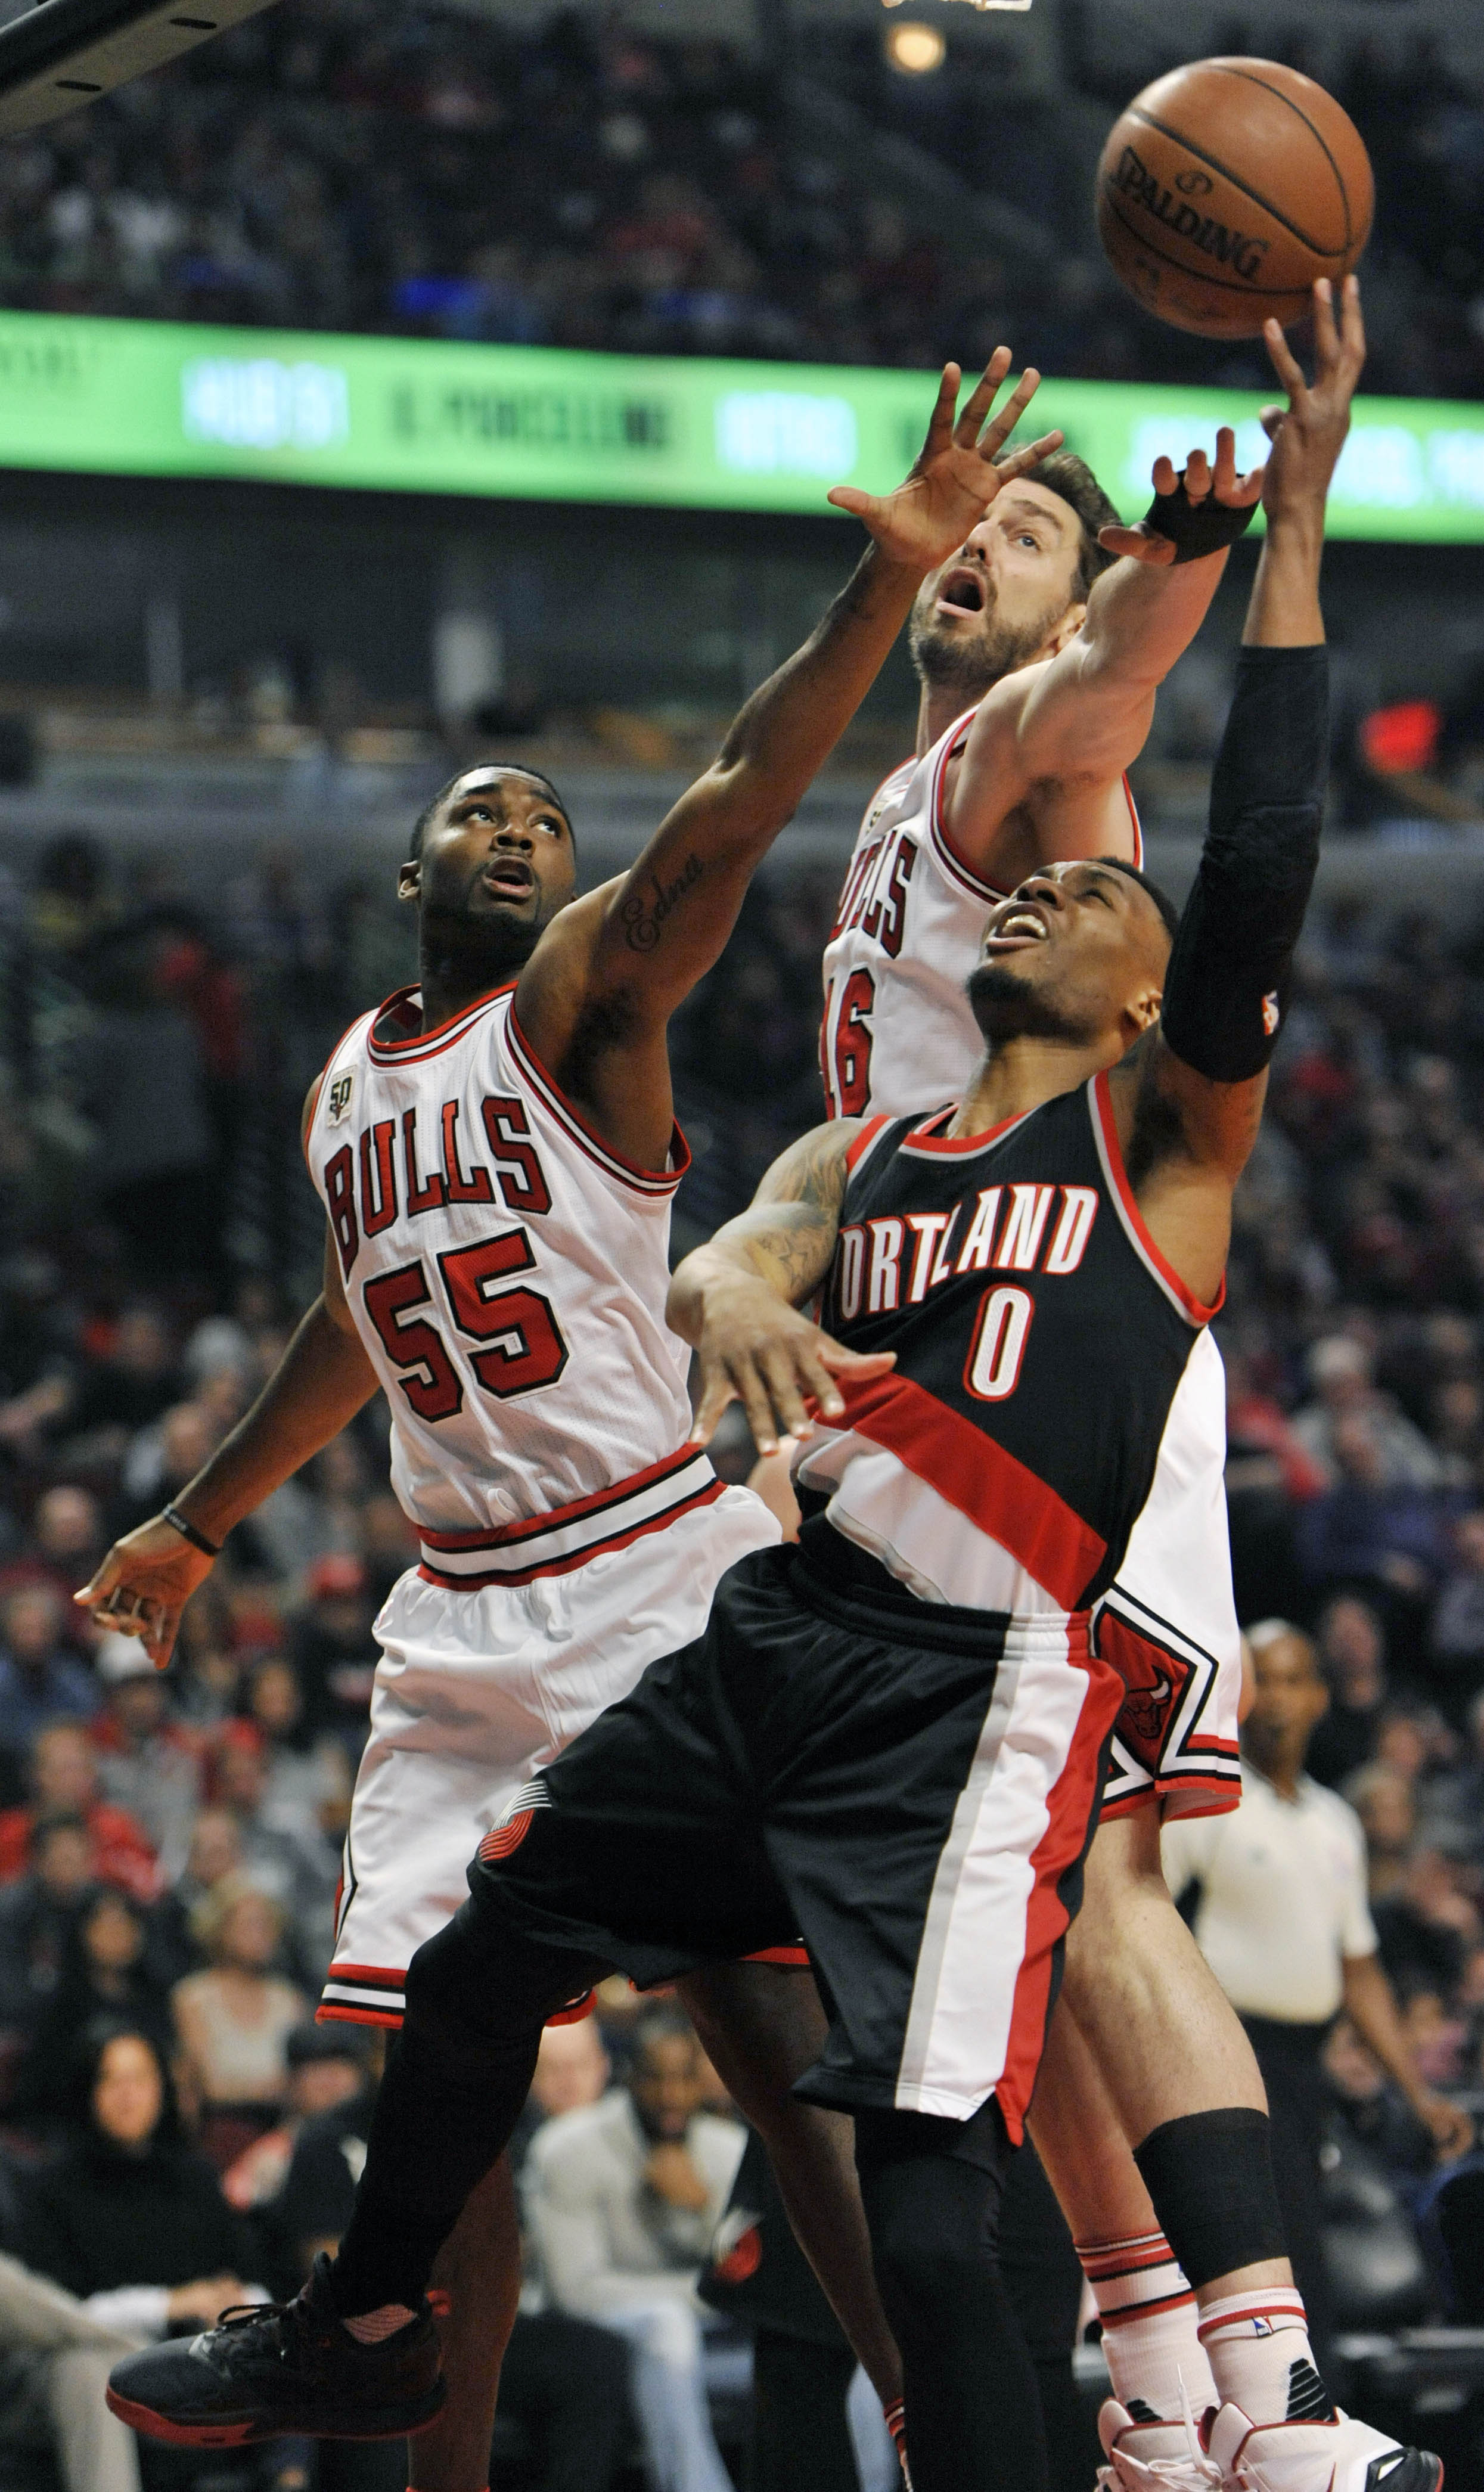 Portland Trail Blazers' Damian Lillard (0) goes up for a shot against Chicago Bulls' Pau Gasol (16) and E'Twaun Moore (55) during the first half of an NBA basketball game Saturday, Feb. 27, 2016, in Chicago.